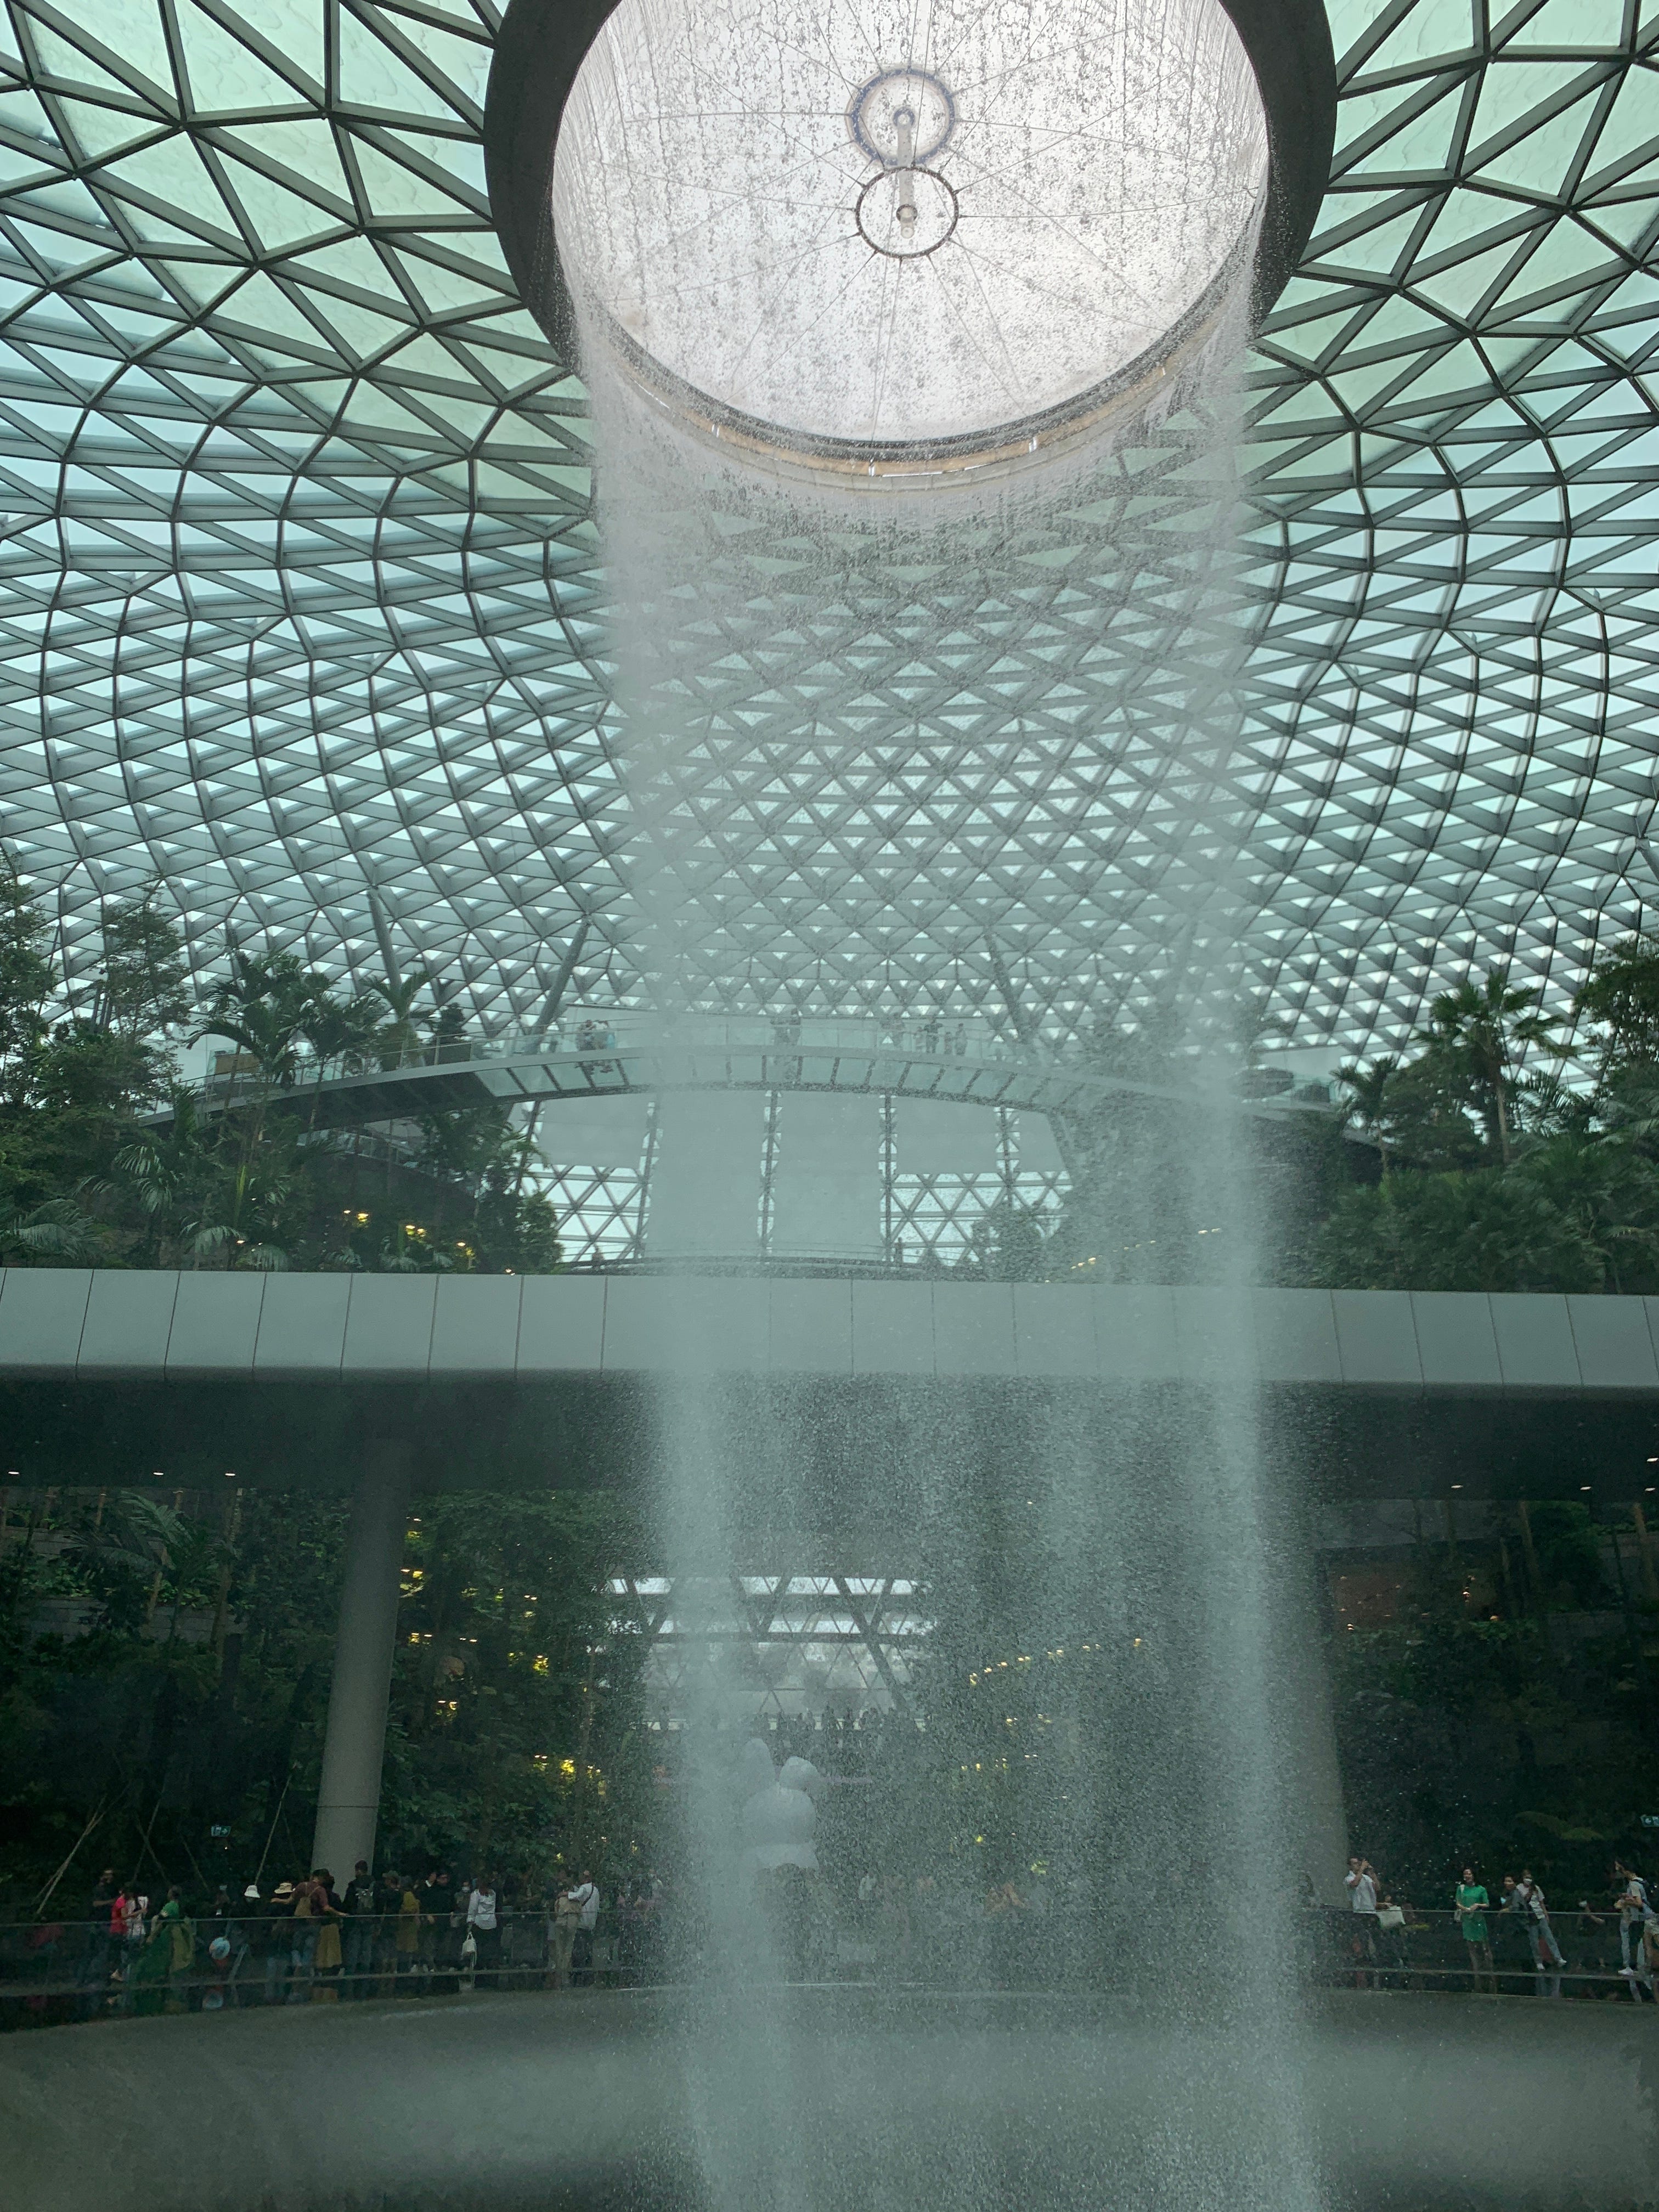 Inside Singapore's Changi Airport: Jewel, a rainforest with a 40